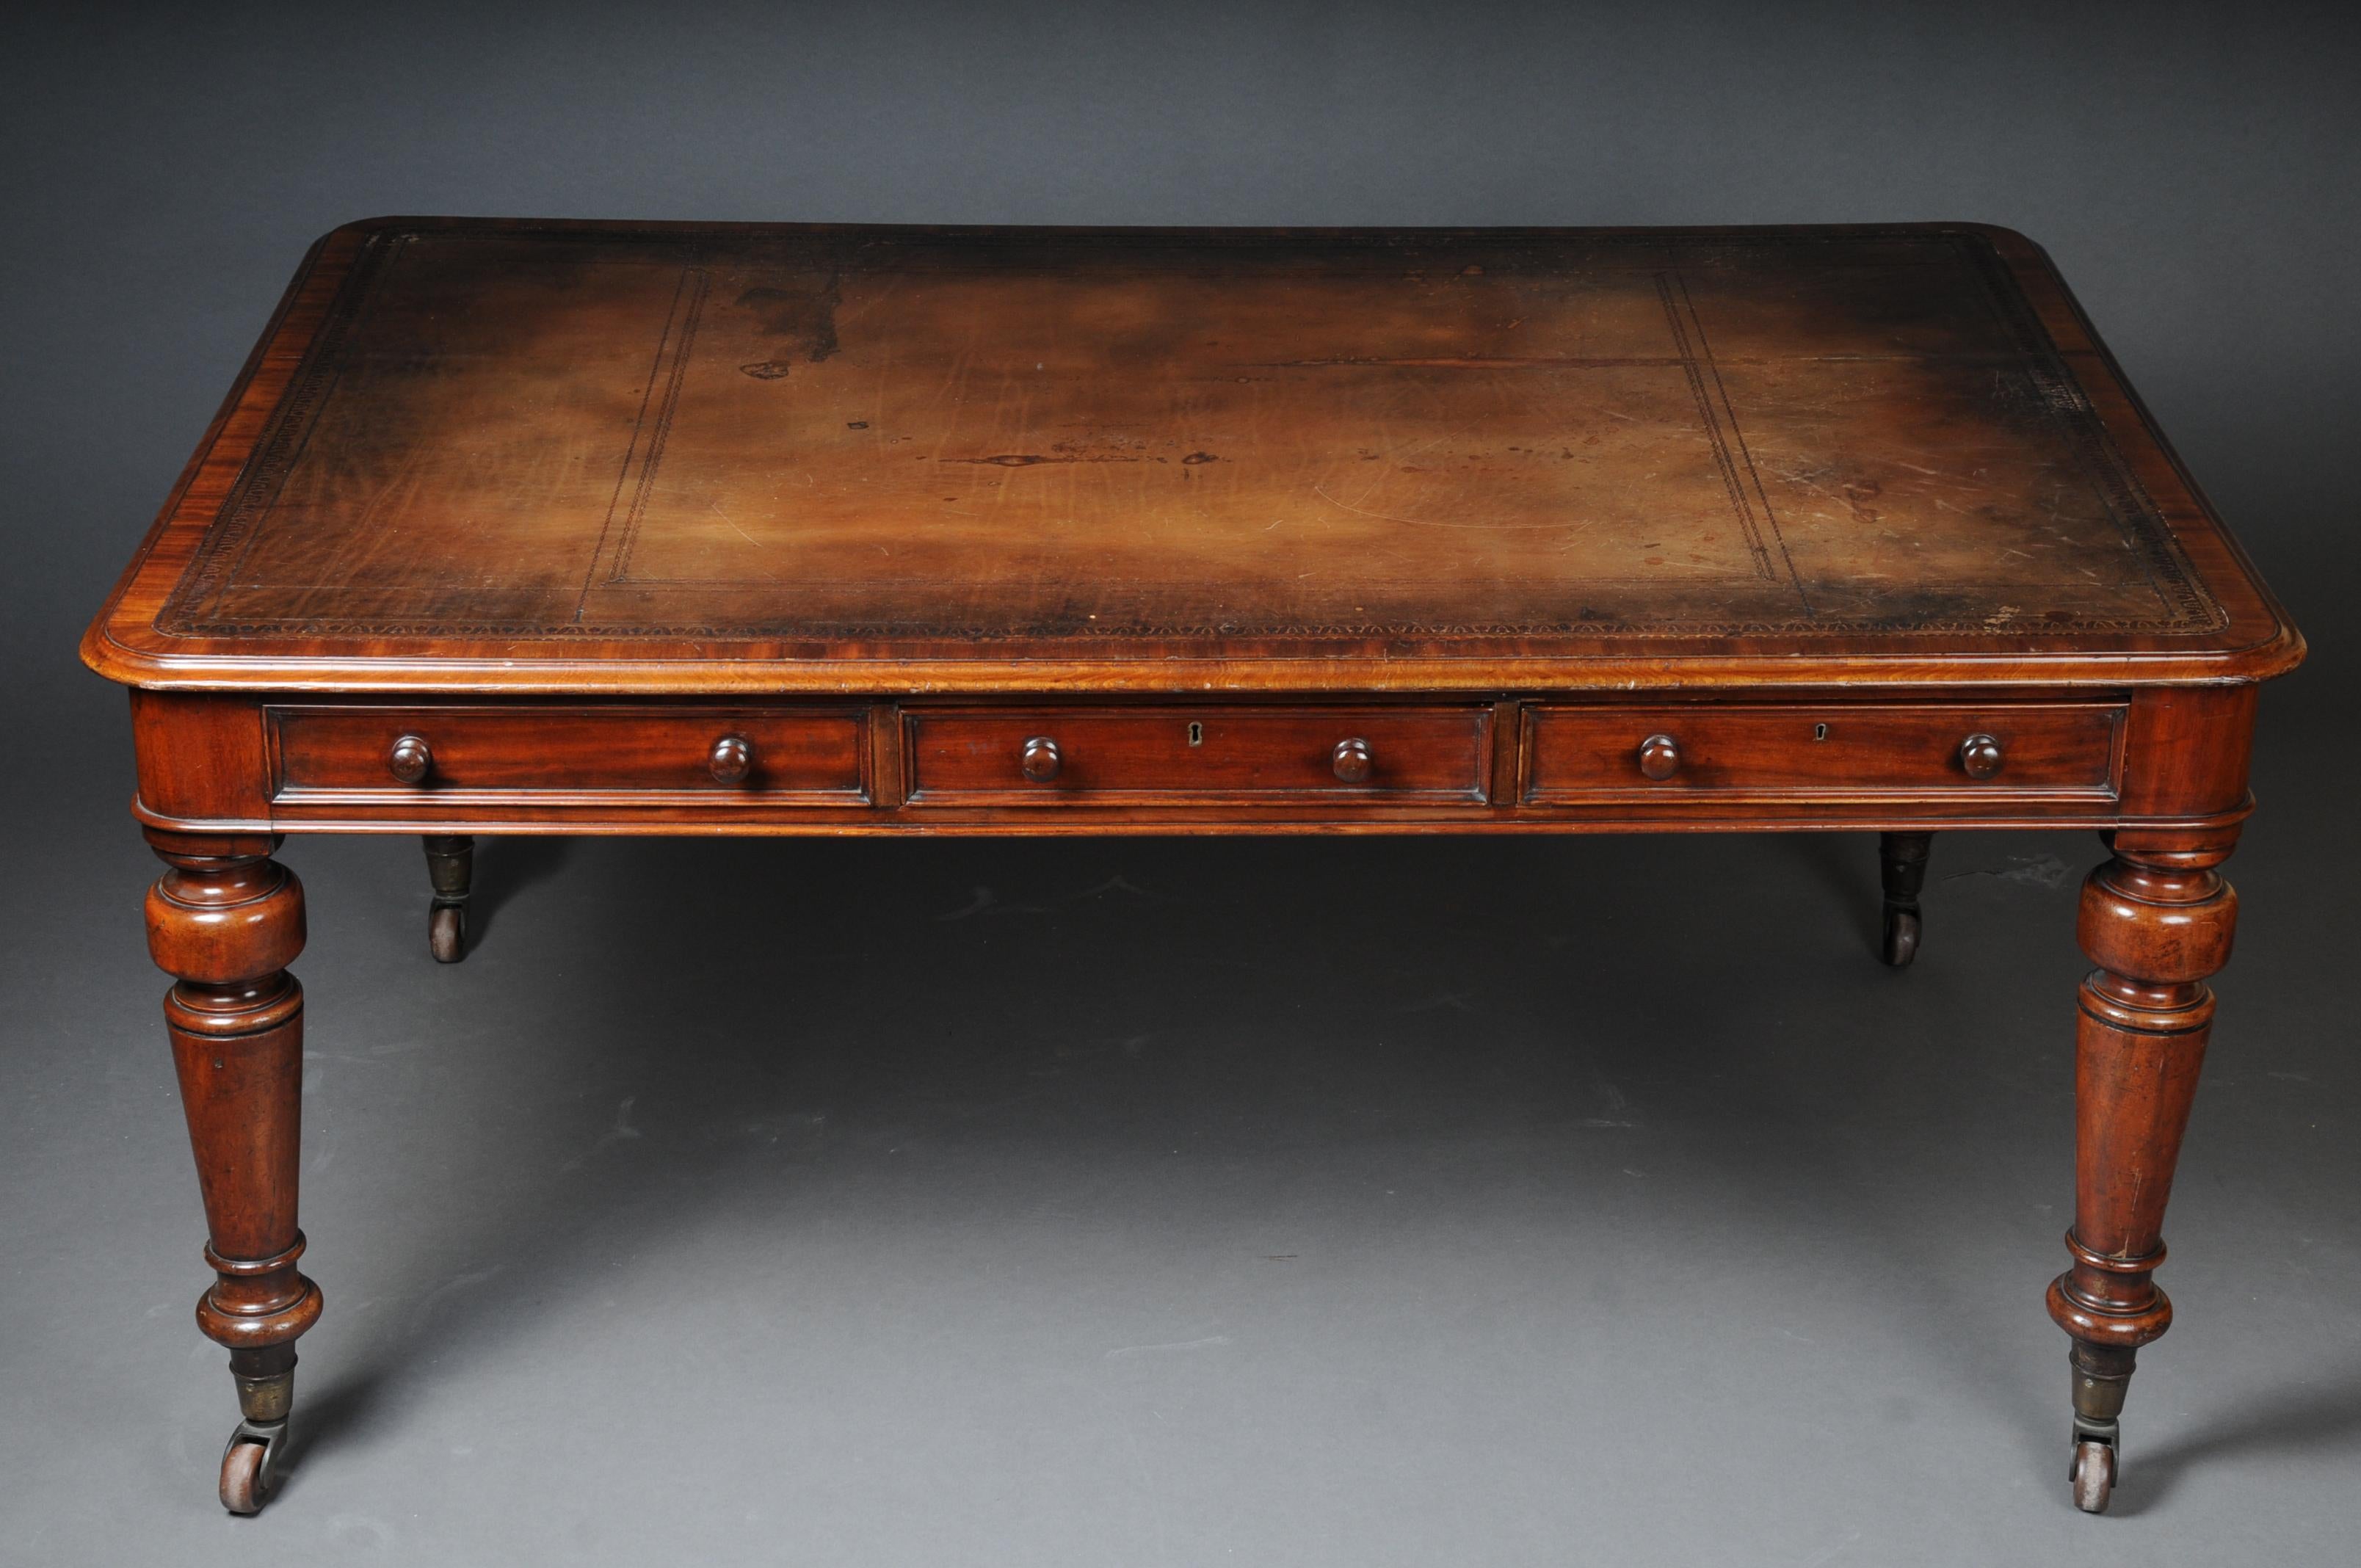 Large Victorian partner desk, England, 19th century

England, 19th century. Mahogany. Rectangular plate with rounded corners and embossed leather covering. Six frame drawers with double knob handles and lockable drawers. Baluster legs on patented